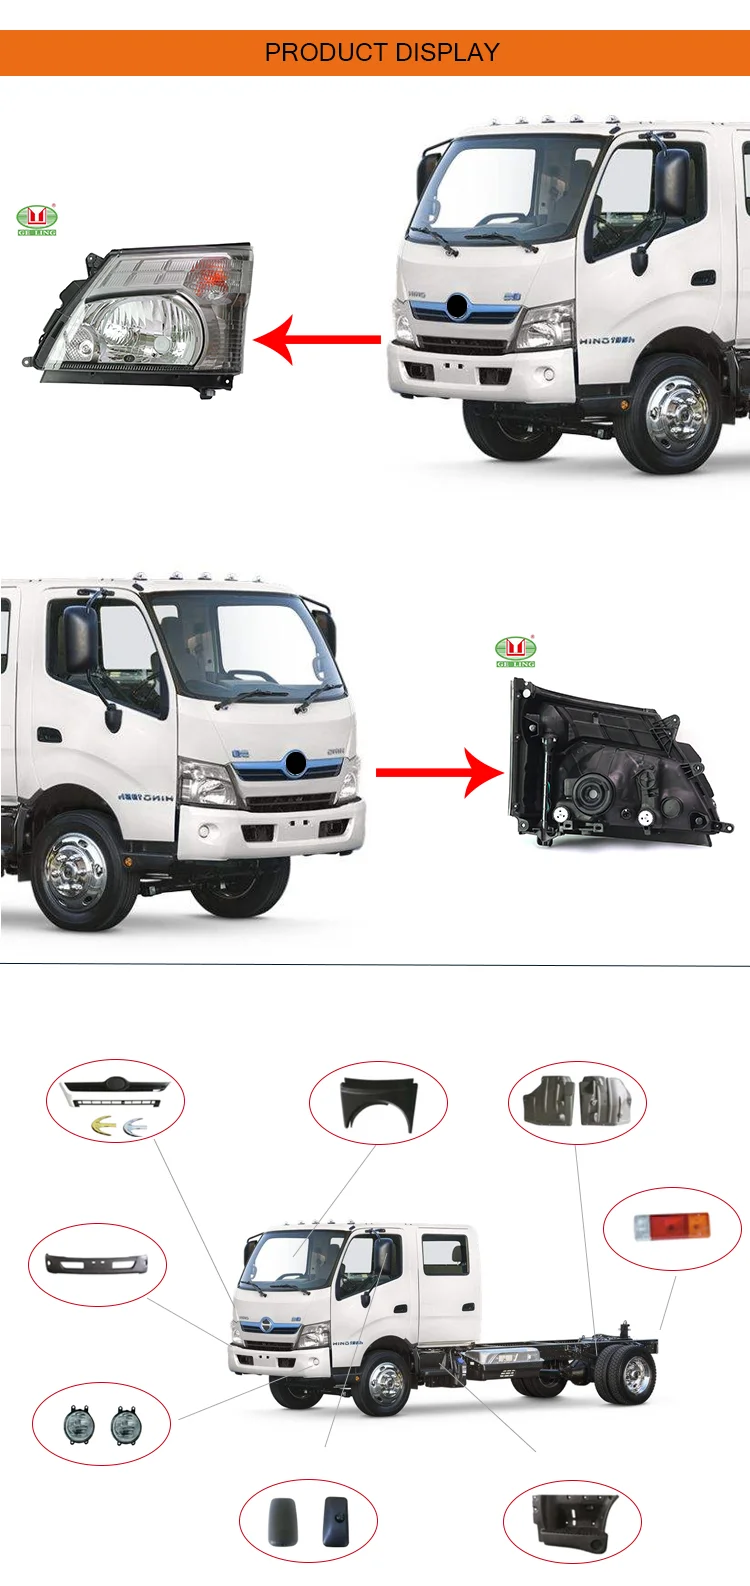 High Quality Truck Front Headlight Assembly For Hino 300 Wide Buy Headlight Assembly Truck Headlight Assembly Front Headlight Assembly Product On Alibaba Com